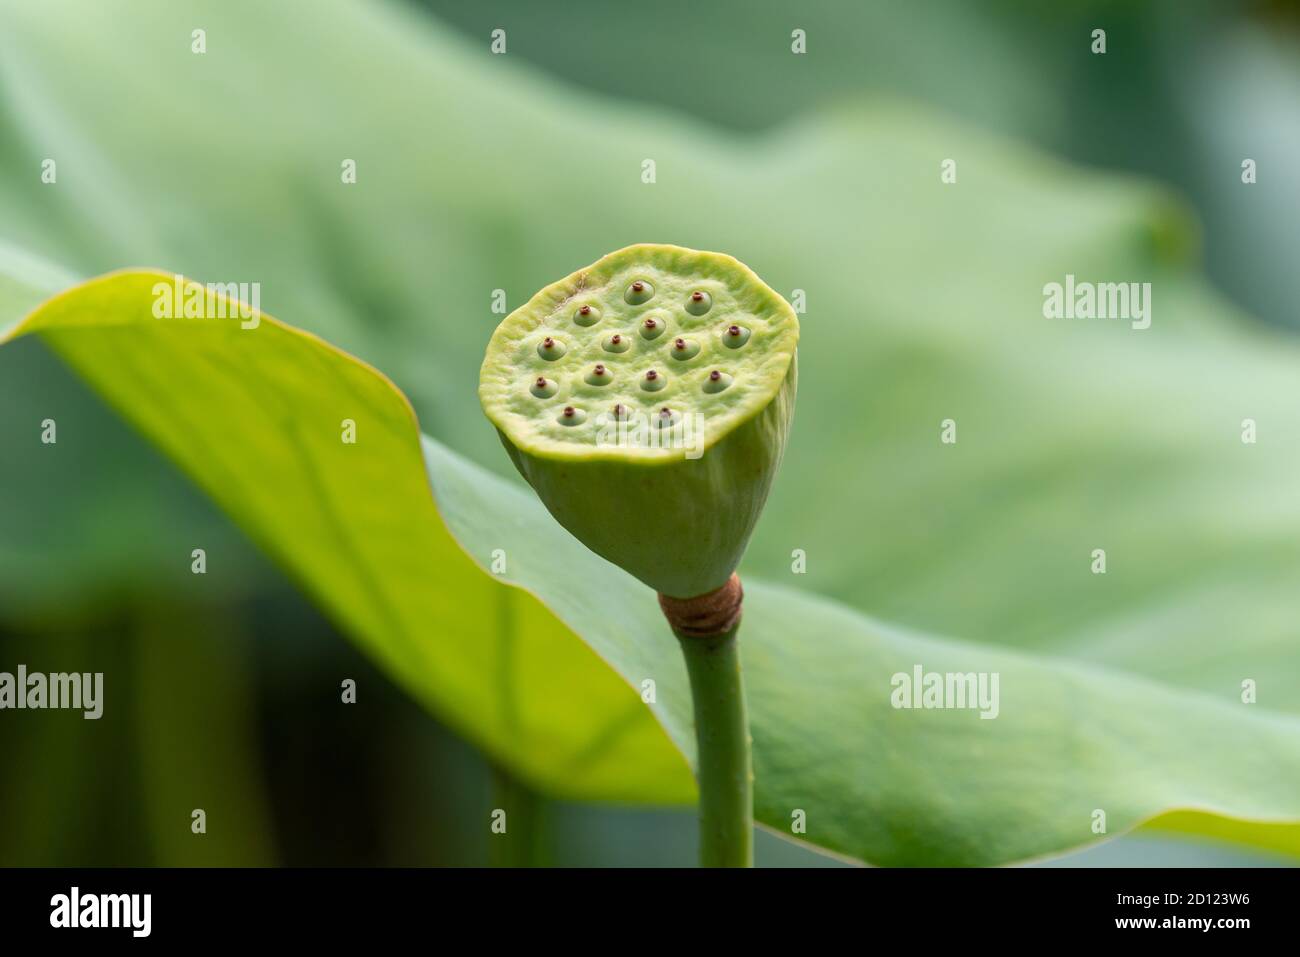 Lotus pod against green leaves in China Stock Photo